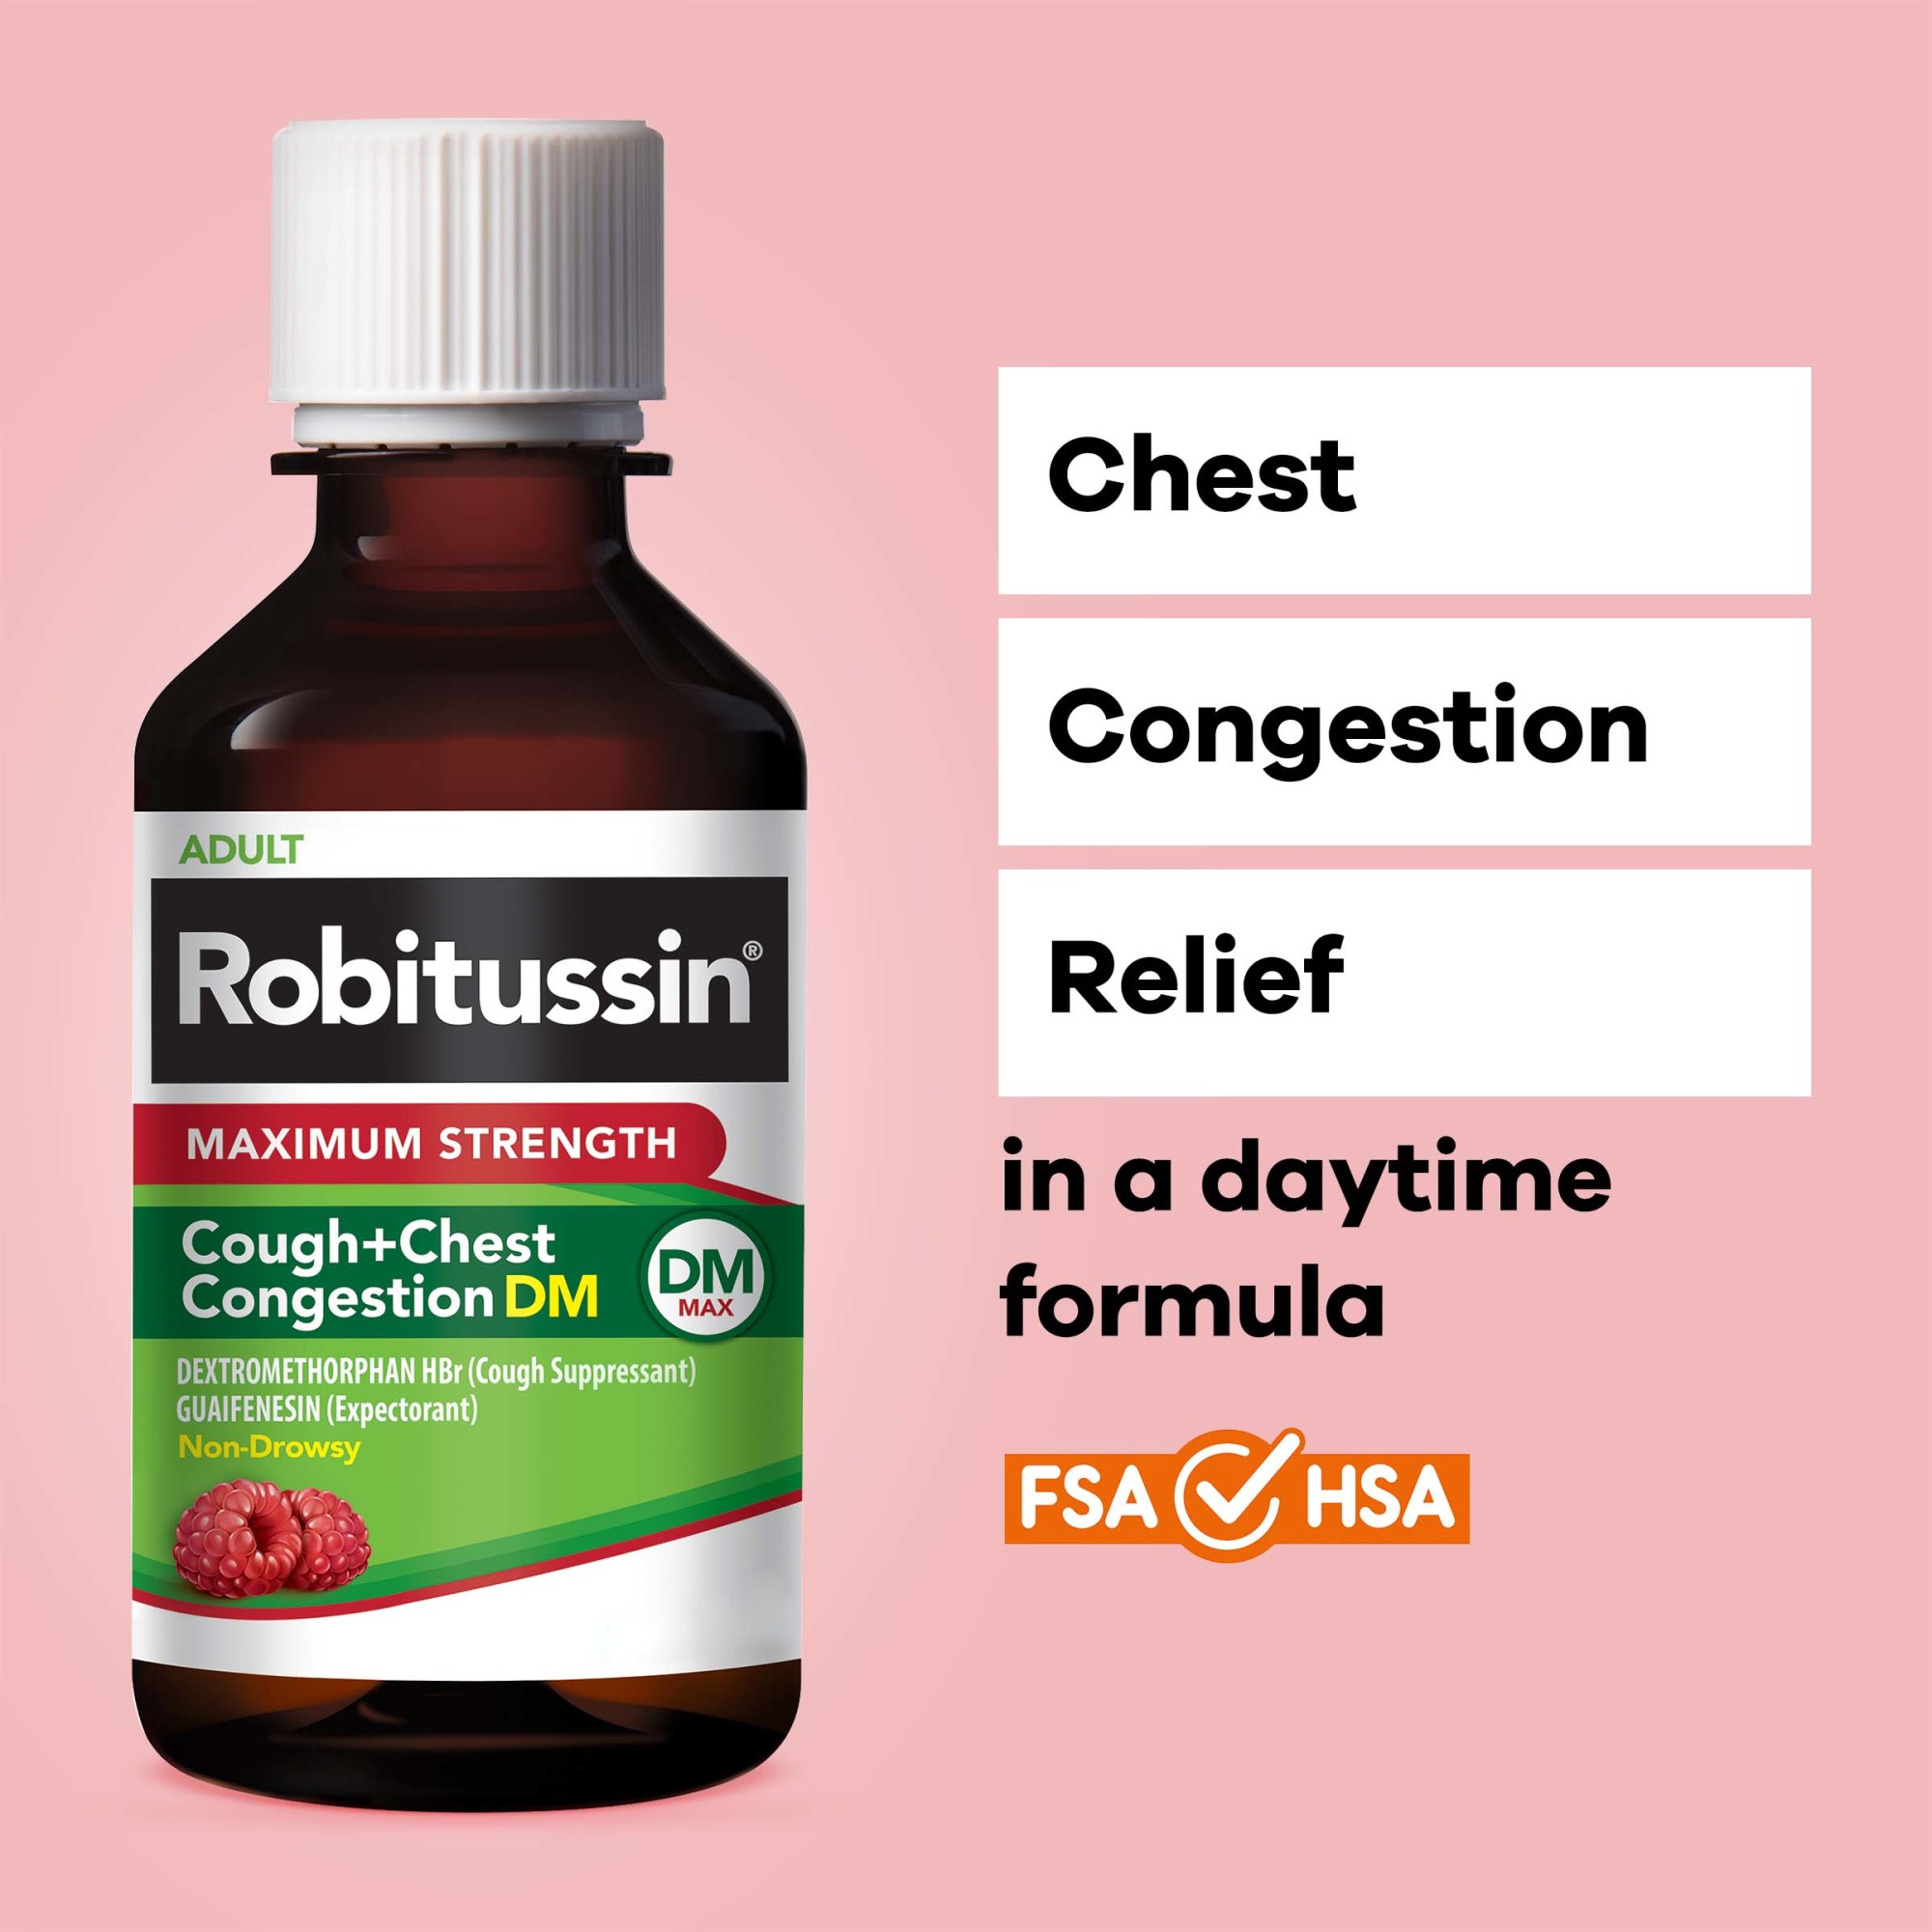 Robitussin Max Strength Non-Drowsy Cough Congestion DM and Cold Medicine, 8 Fl Oz - image 5 of 9